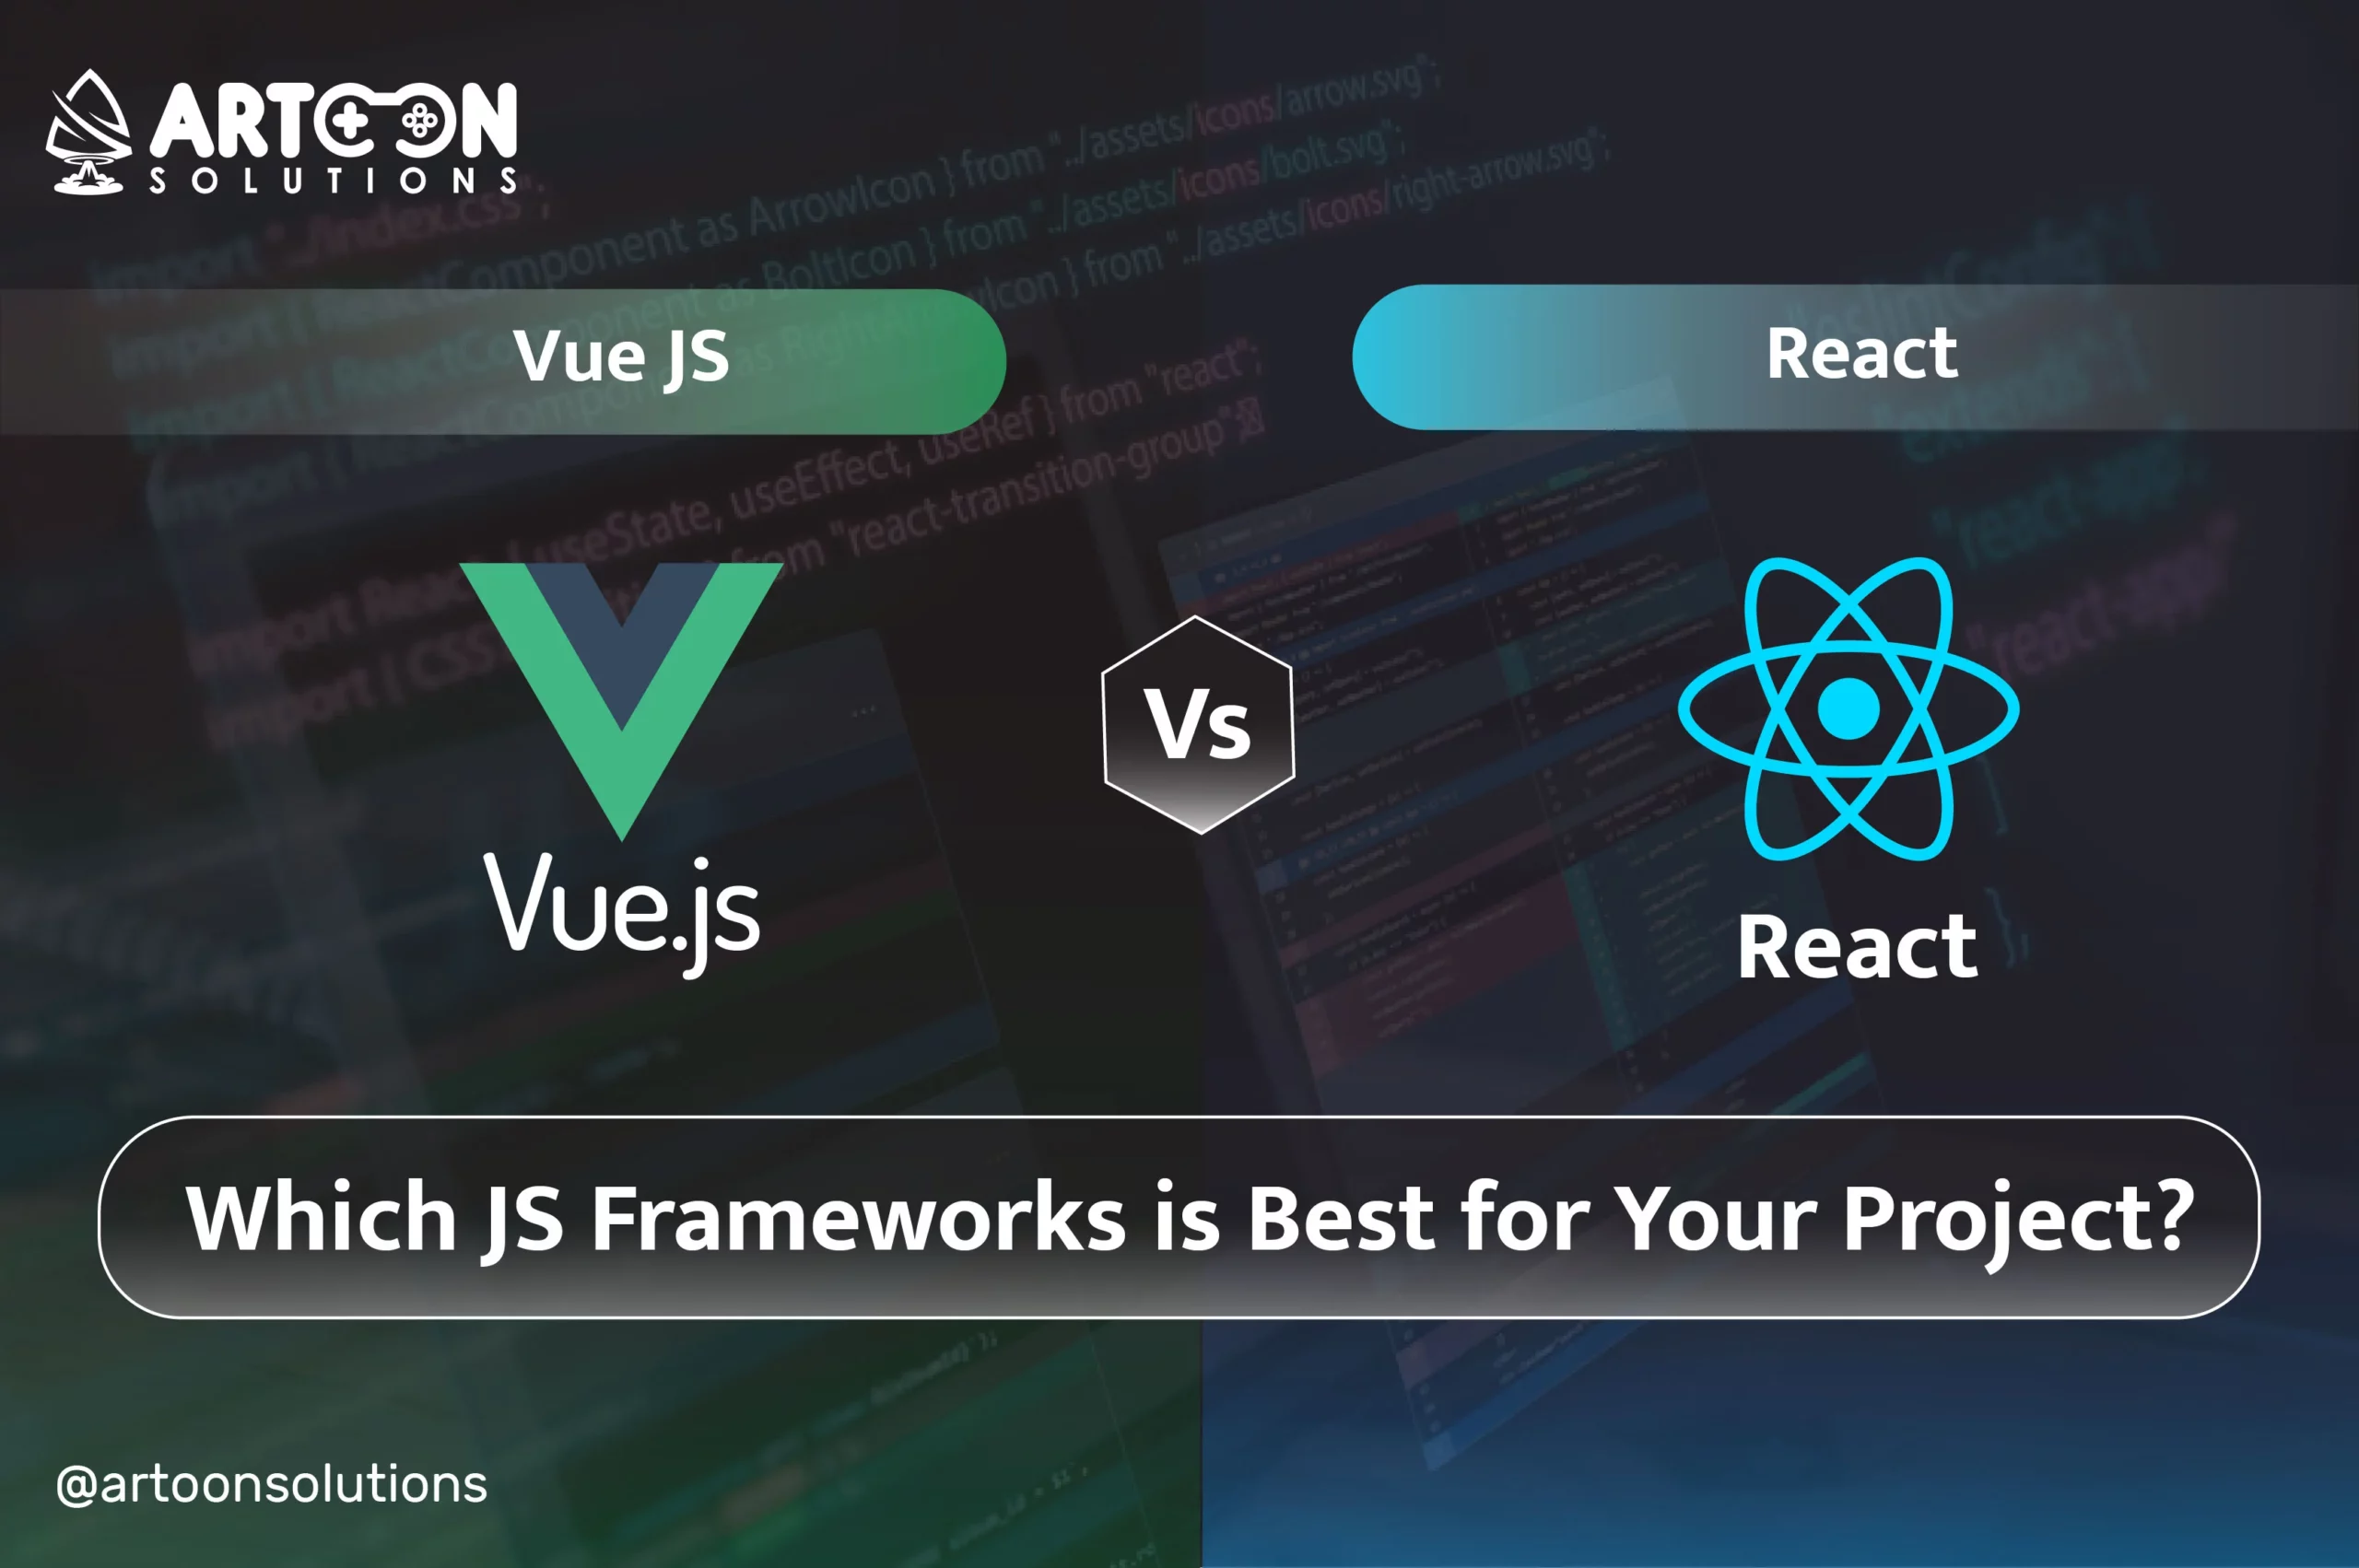 Vue JS vs React: Which JS Frameworks is Best for Your Project?